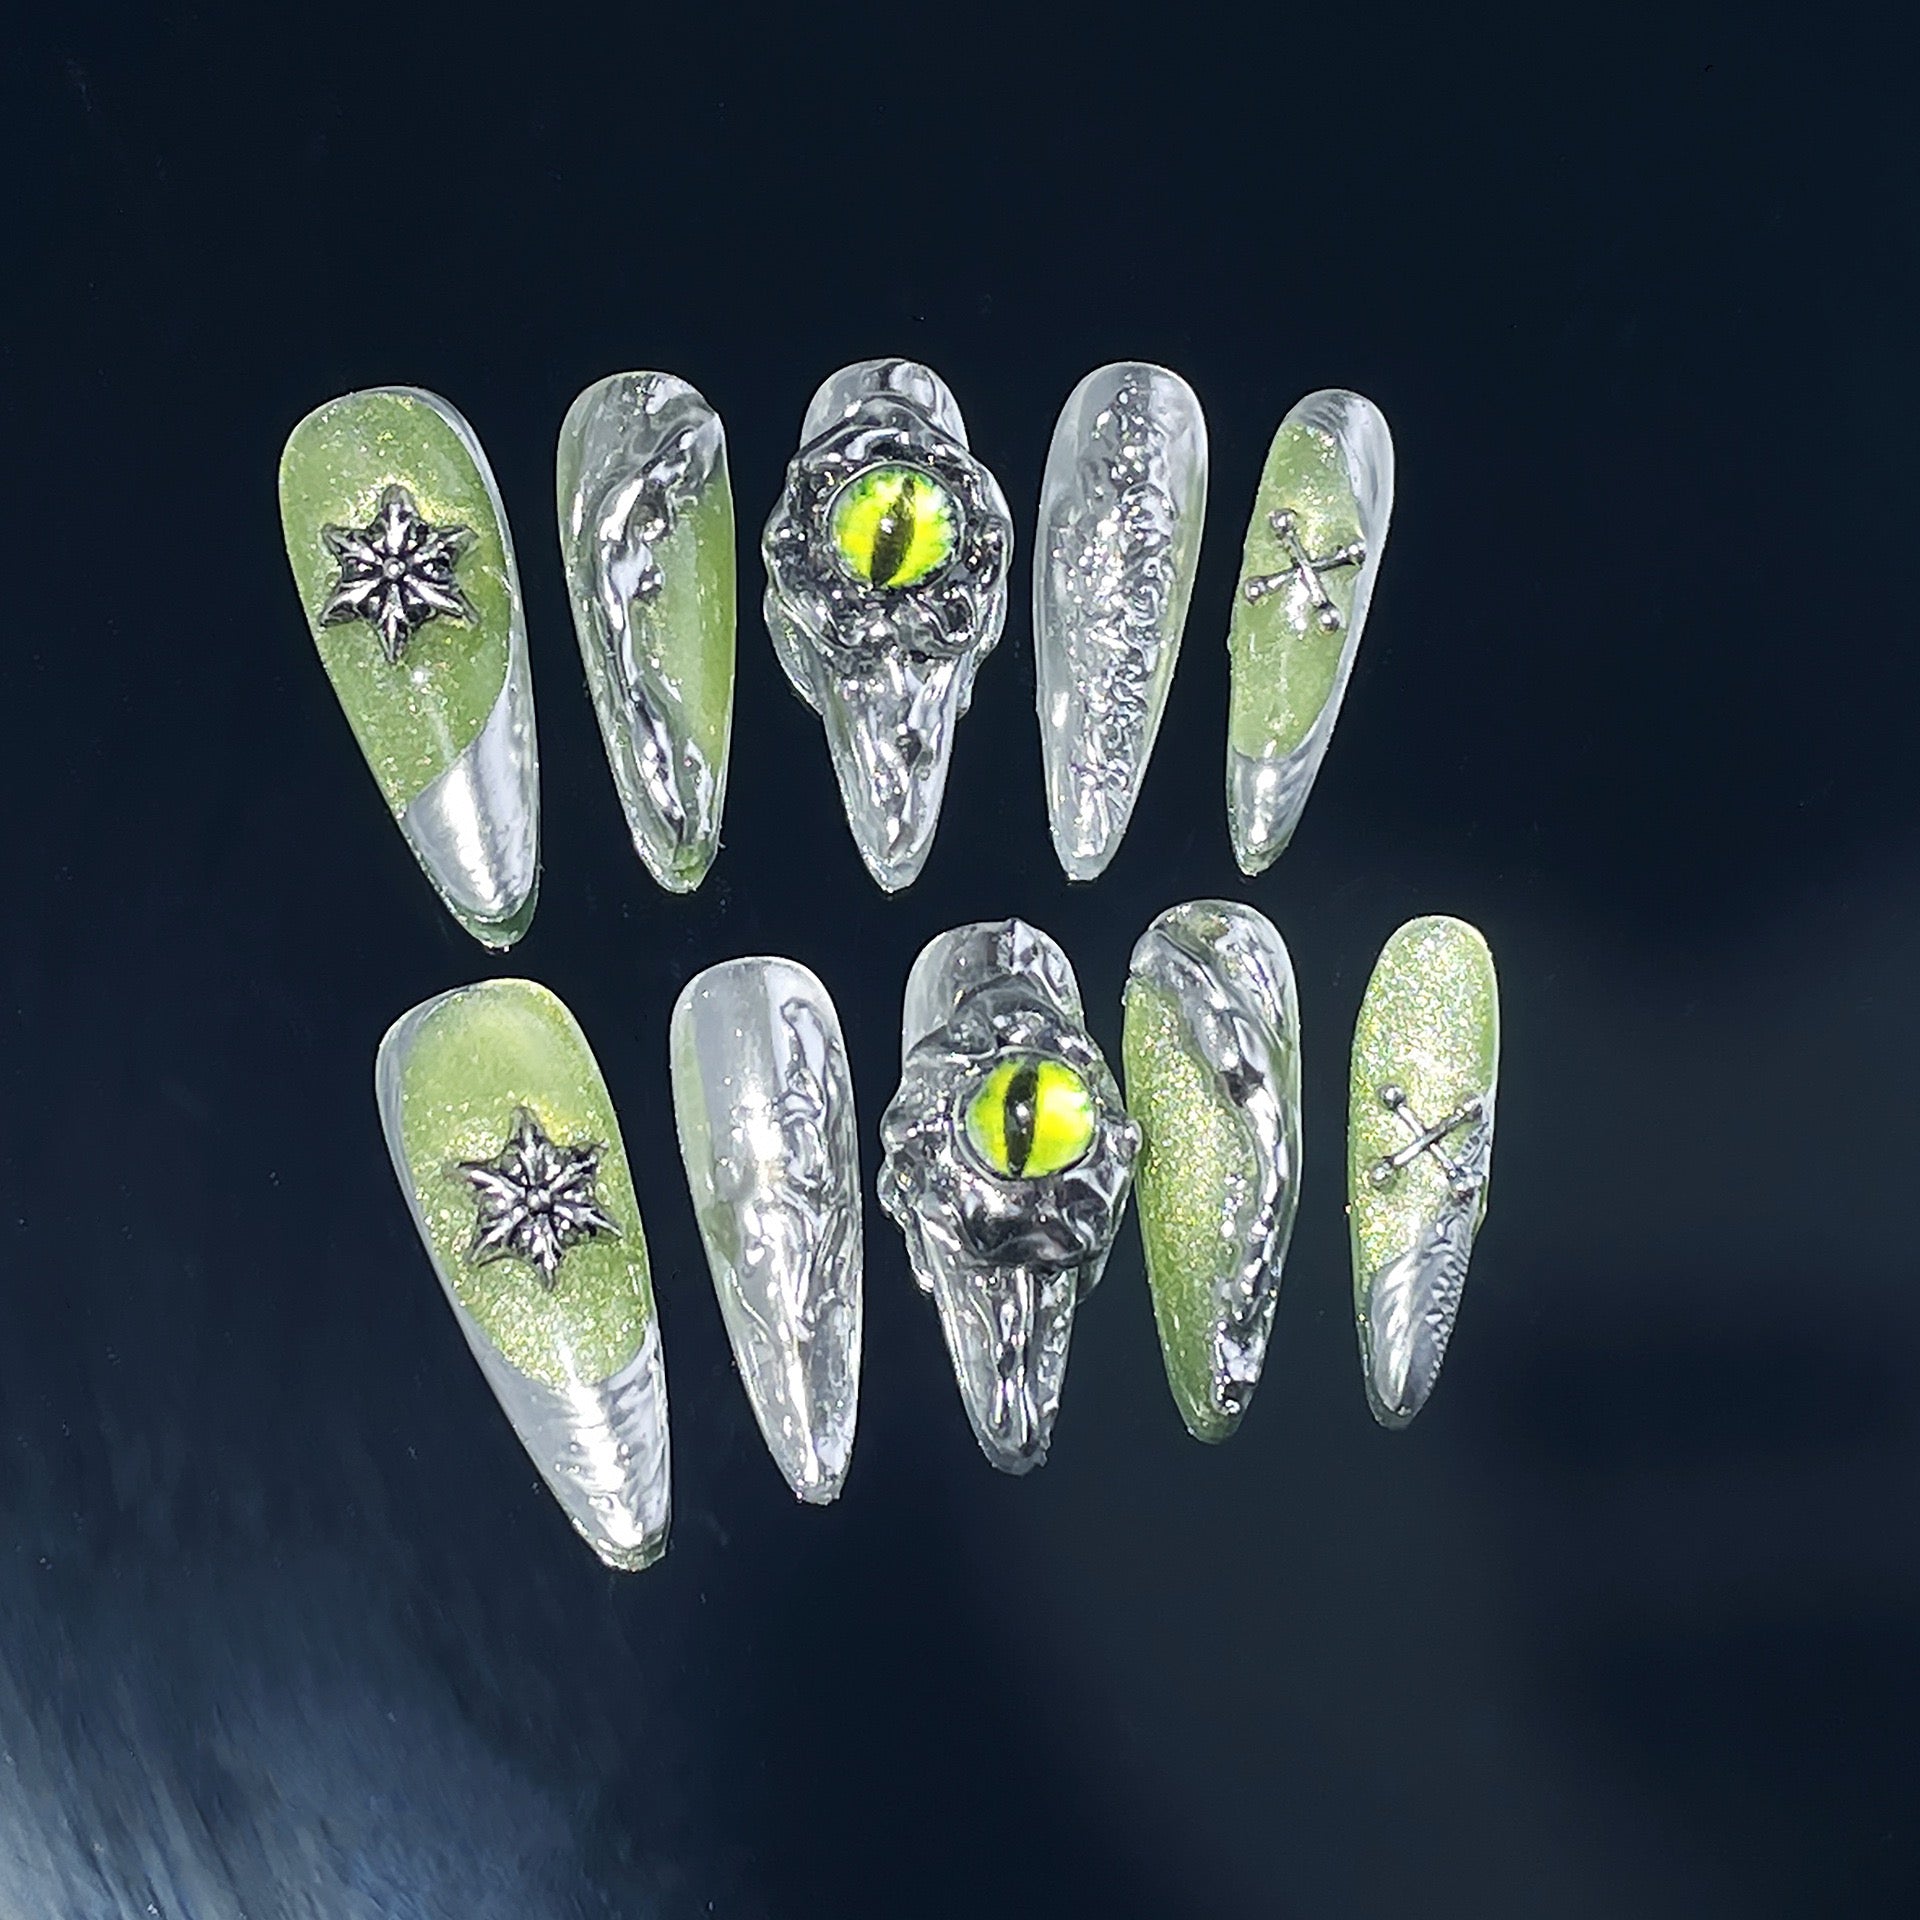 Fairy's Gaze Metal Holographic Long Nail Stickers False Nails from SHOPQAQ